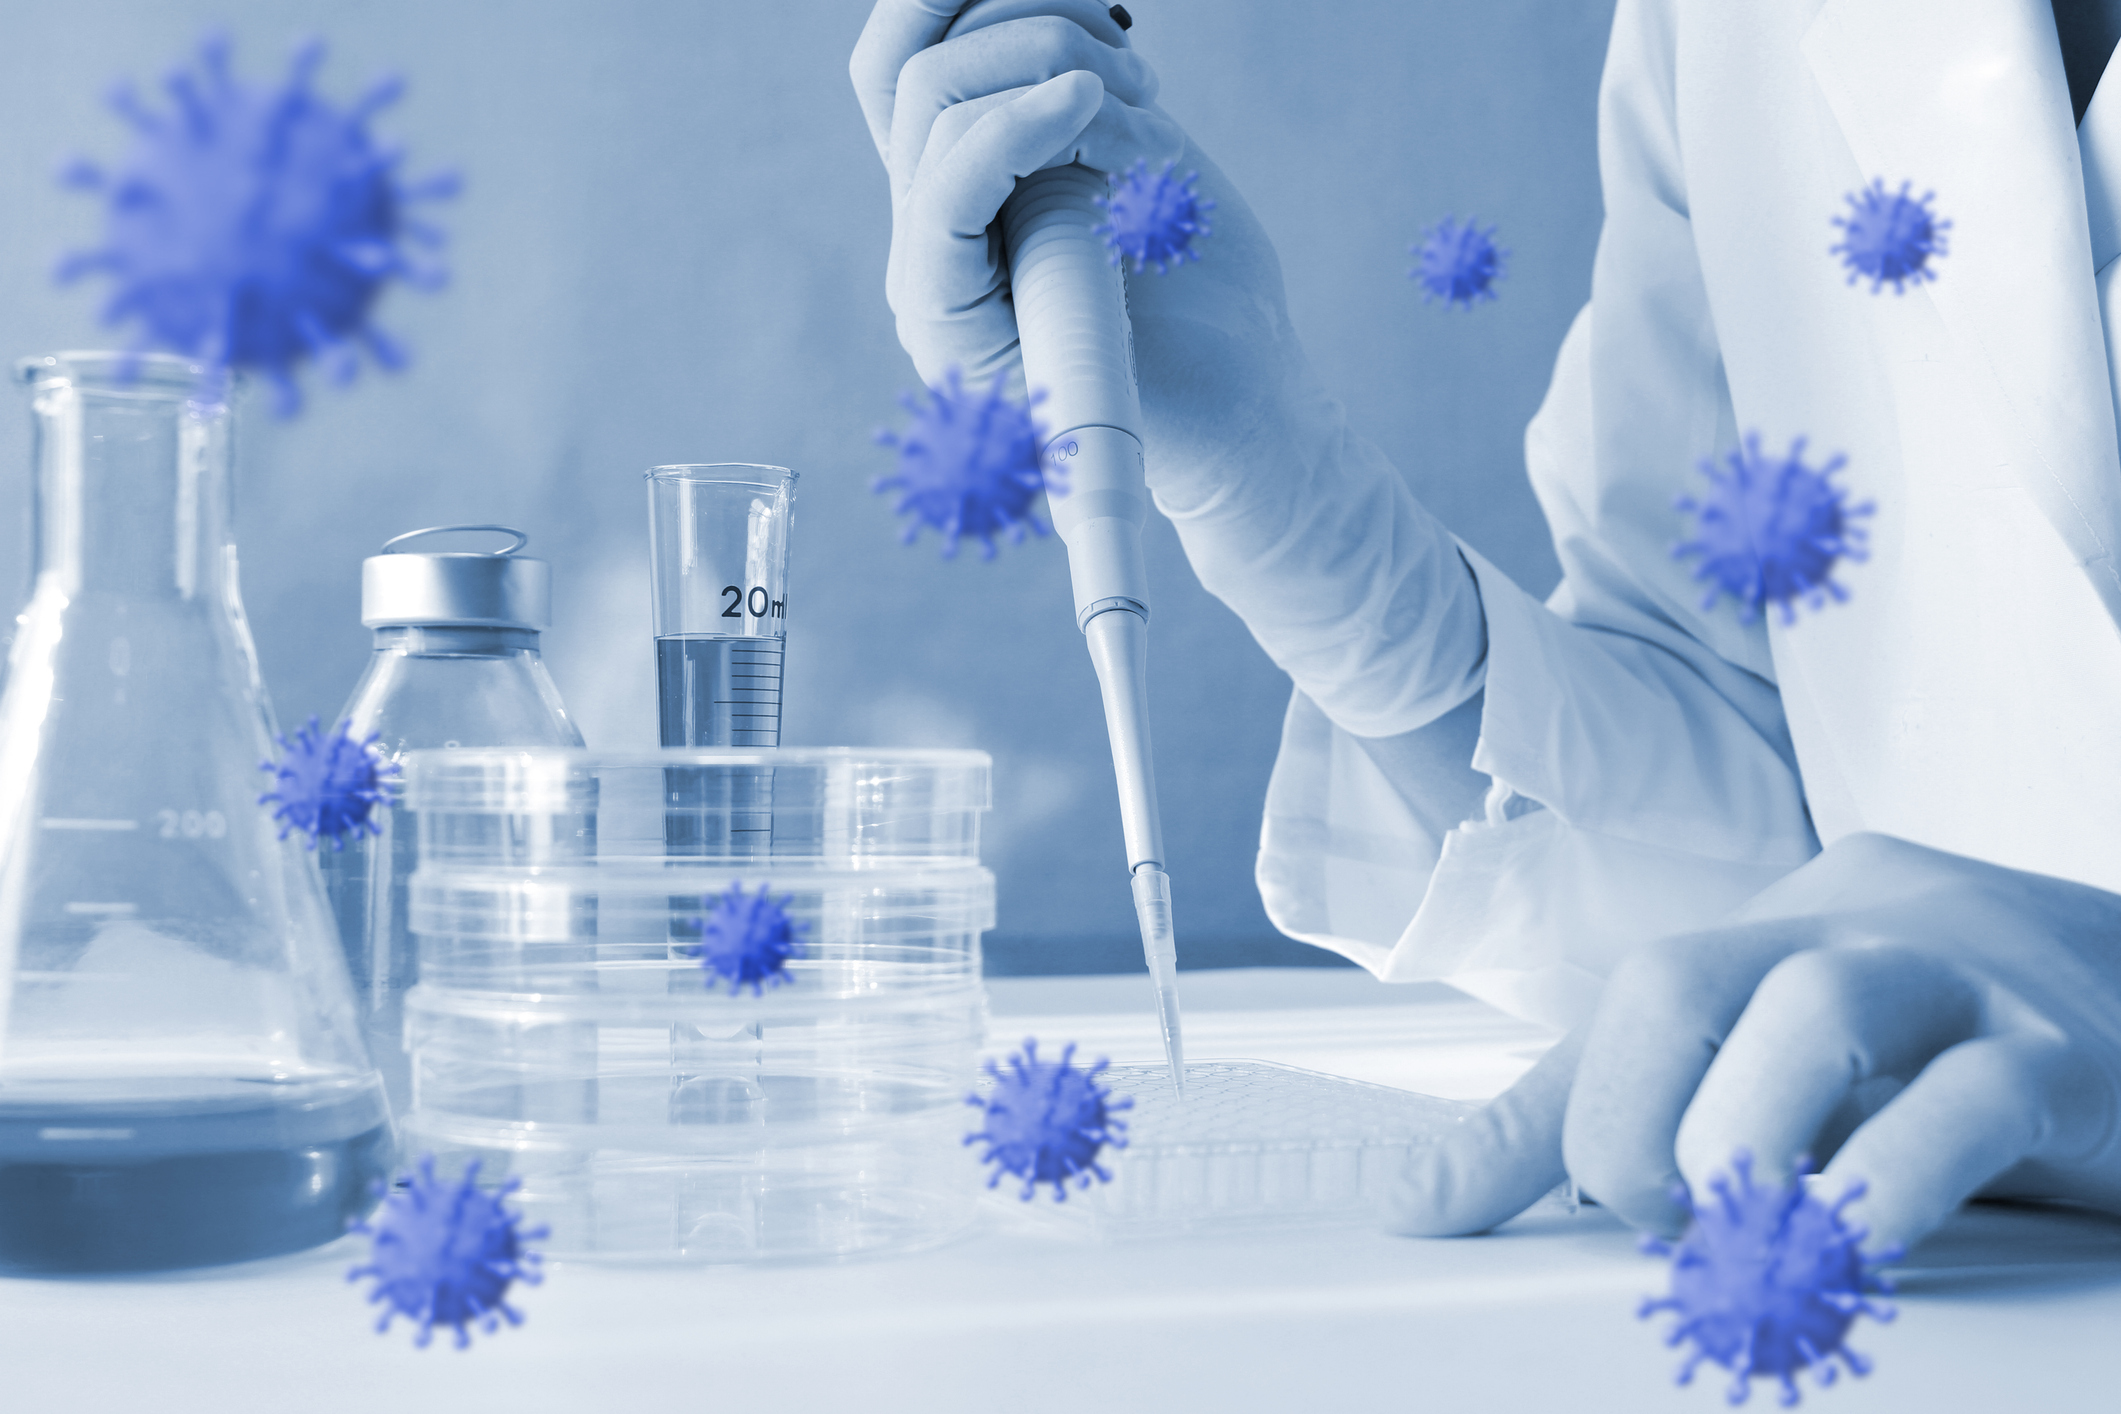 Photoillustration of coronavirus floating around lab equipment with person holding a pipette